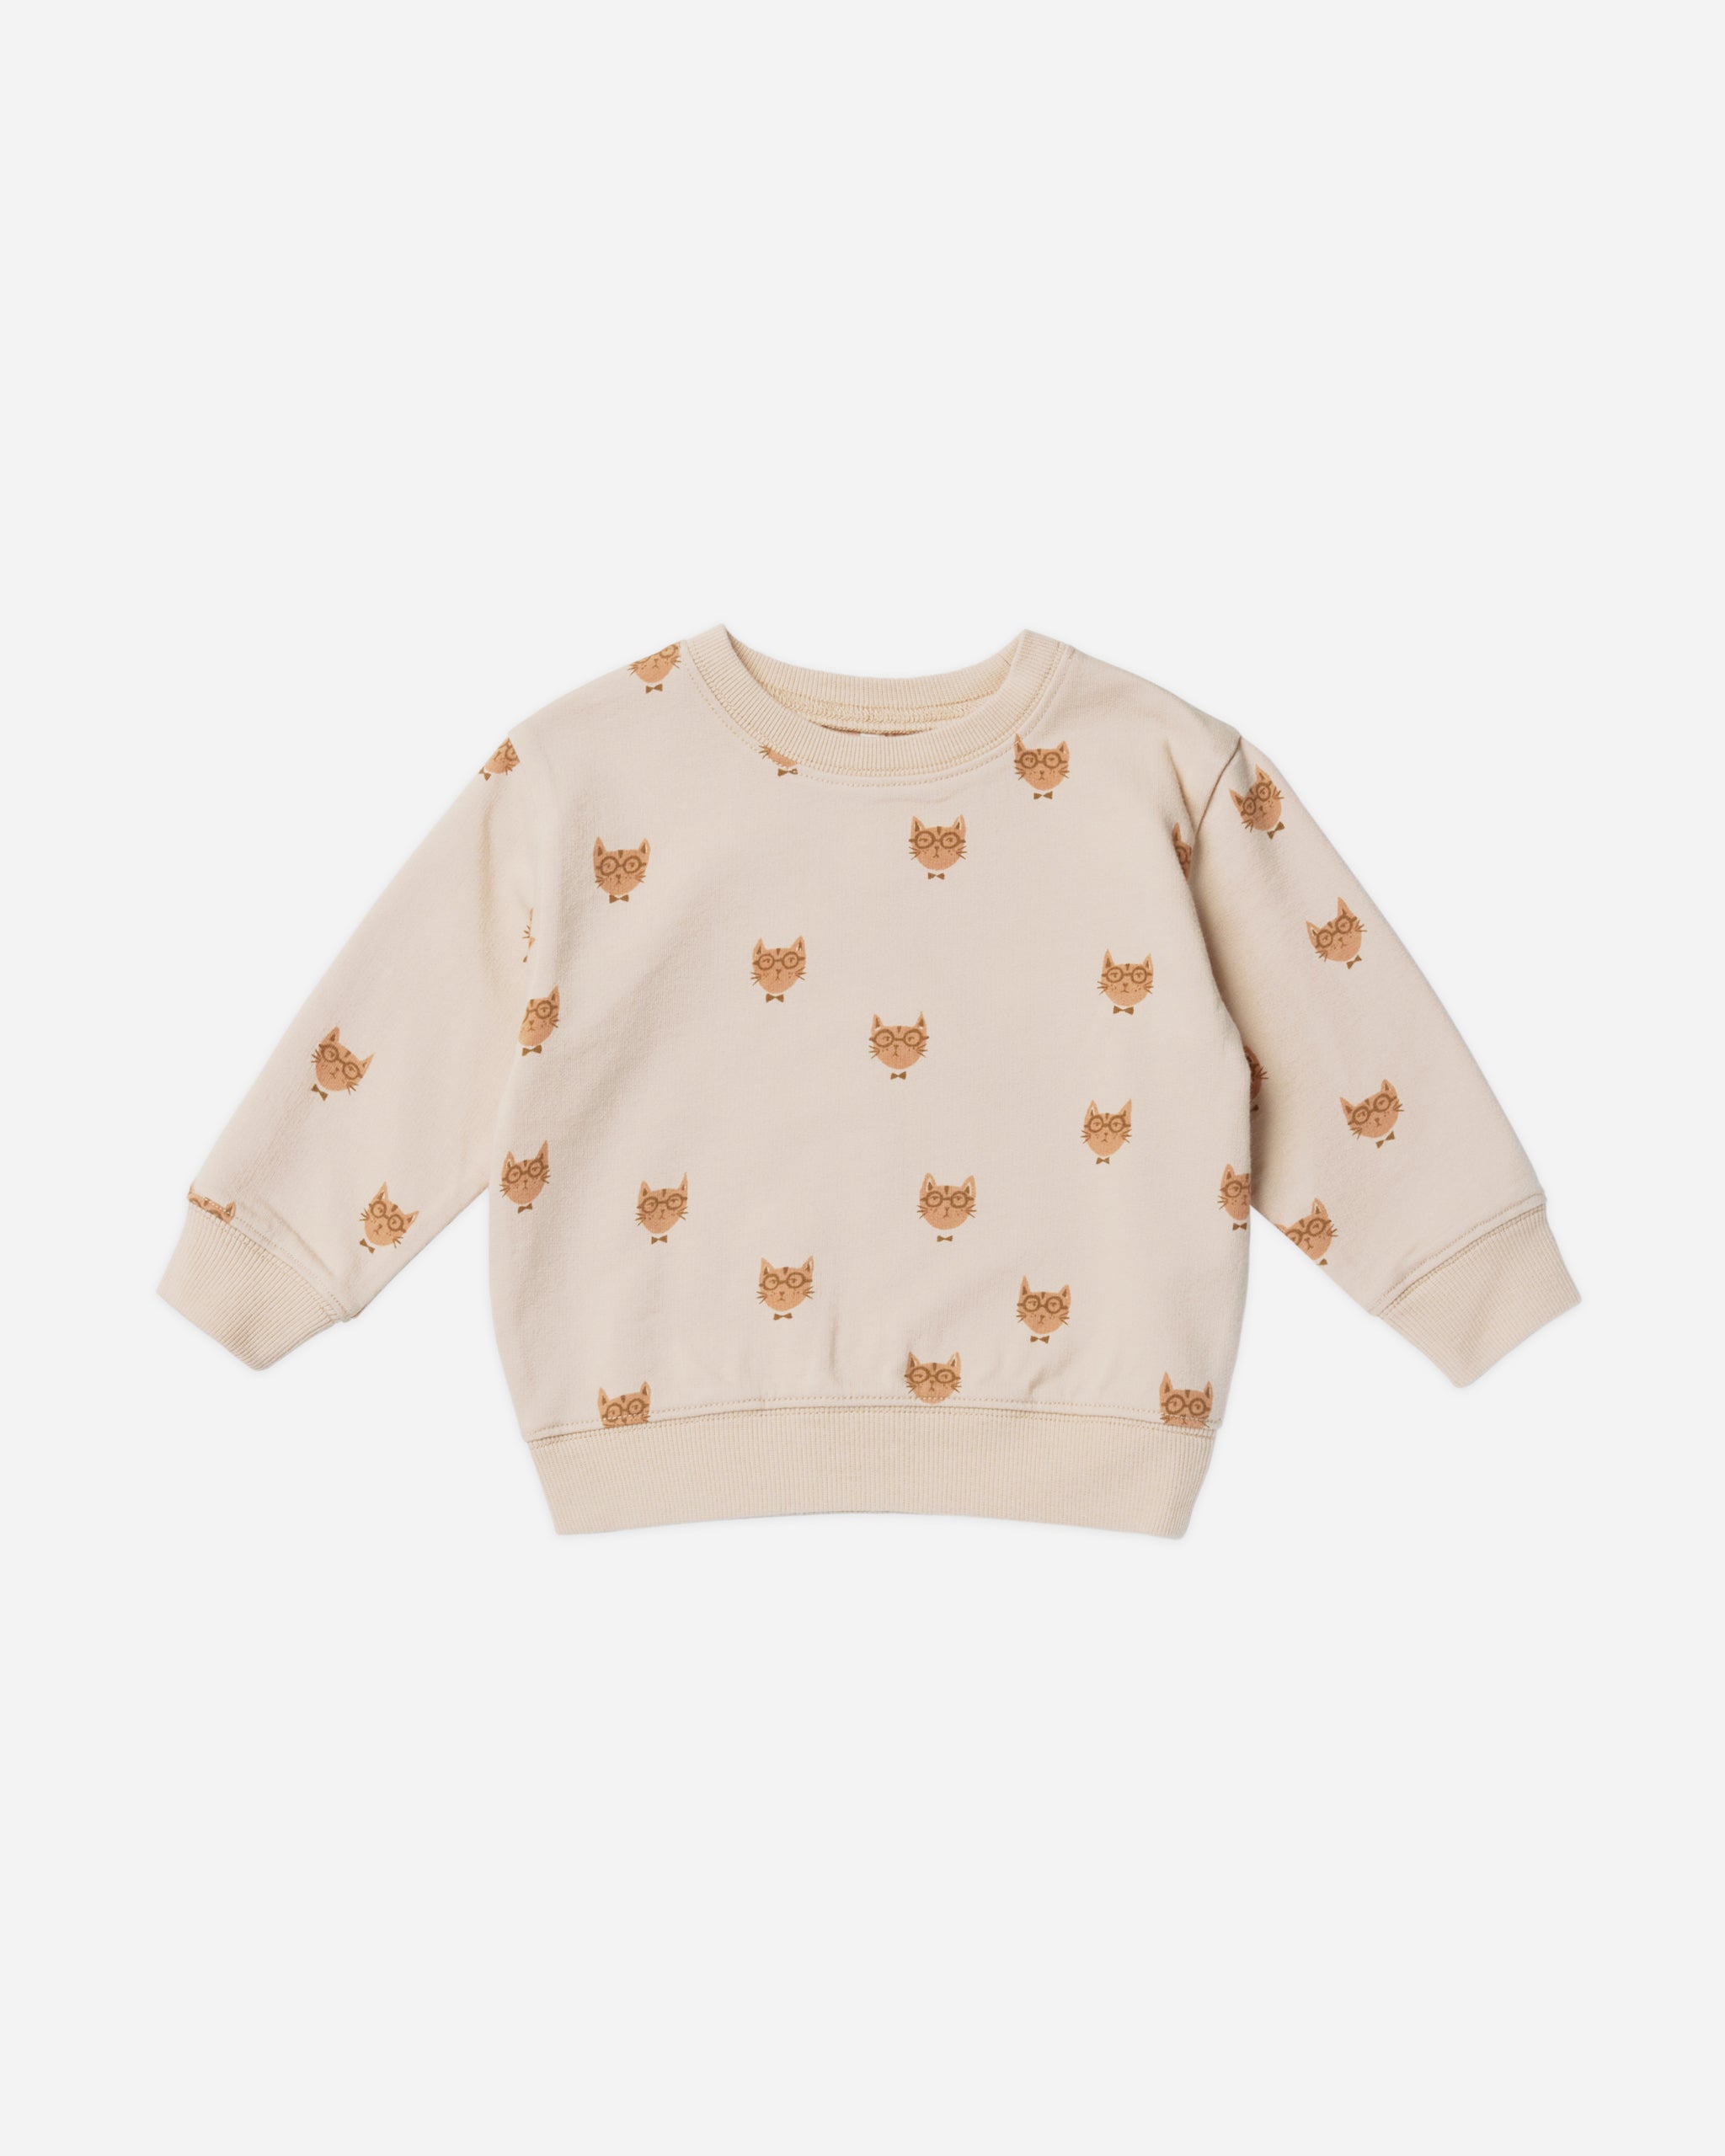 Sweatshirt || Cool Cat - Rylee + Cru | Kids Clothes | Trendy Baby Clothes | Modern Infant Outfits |